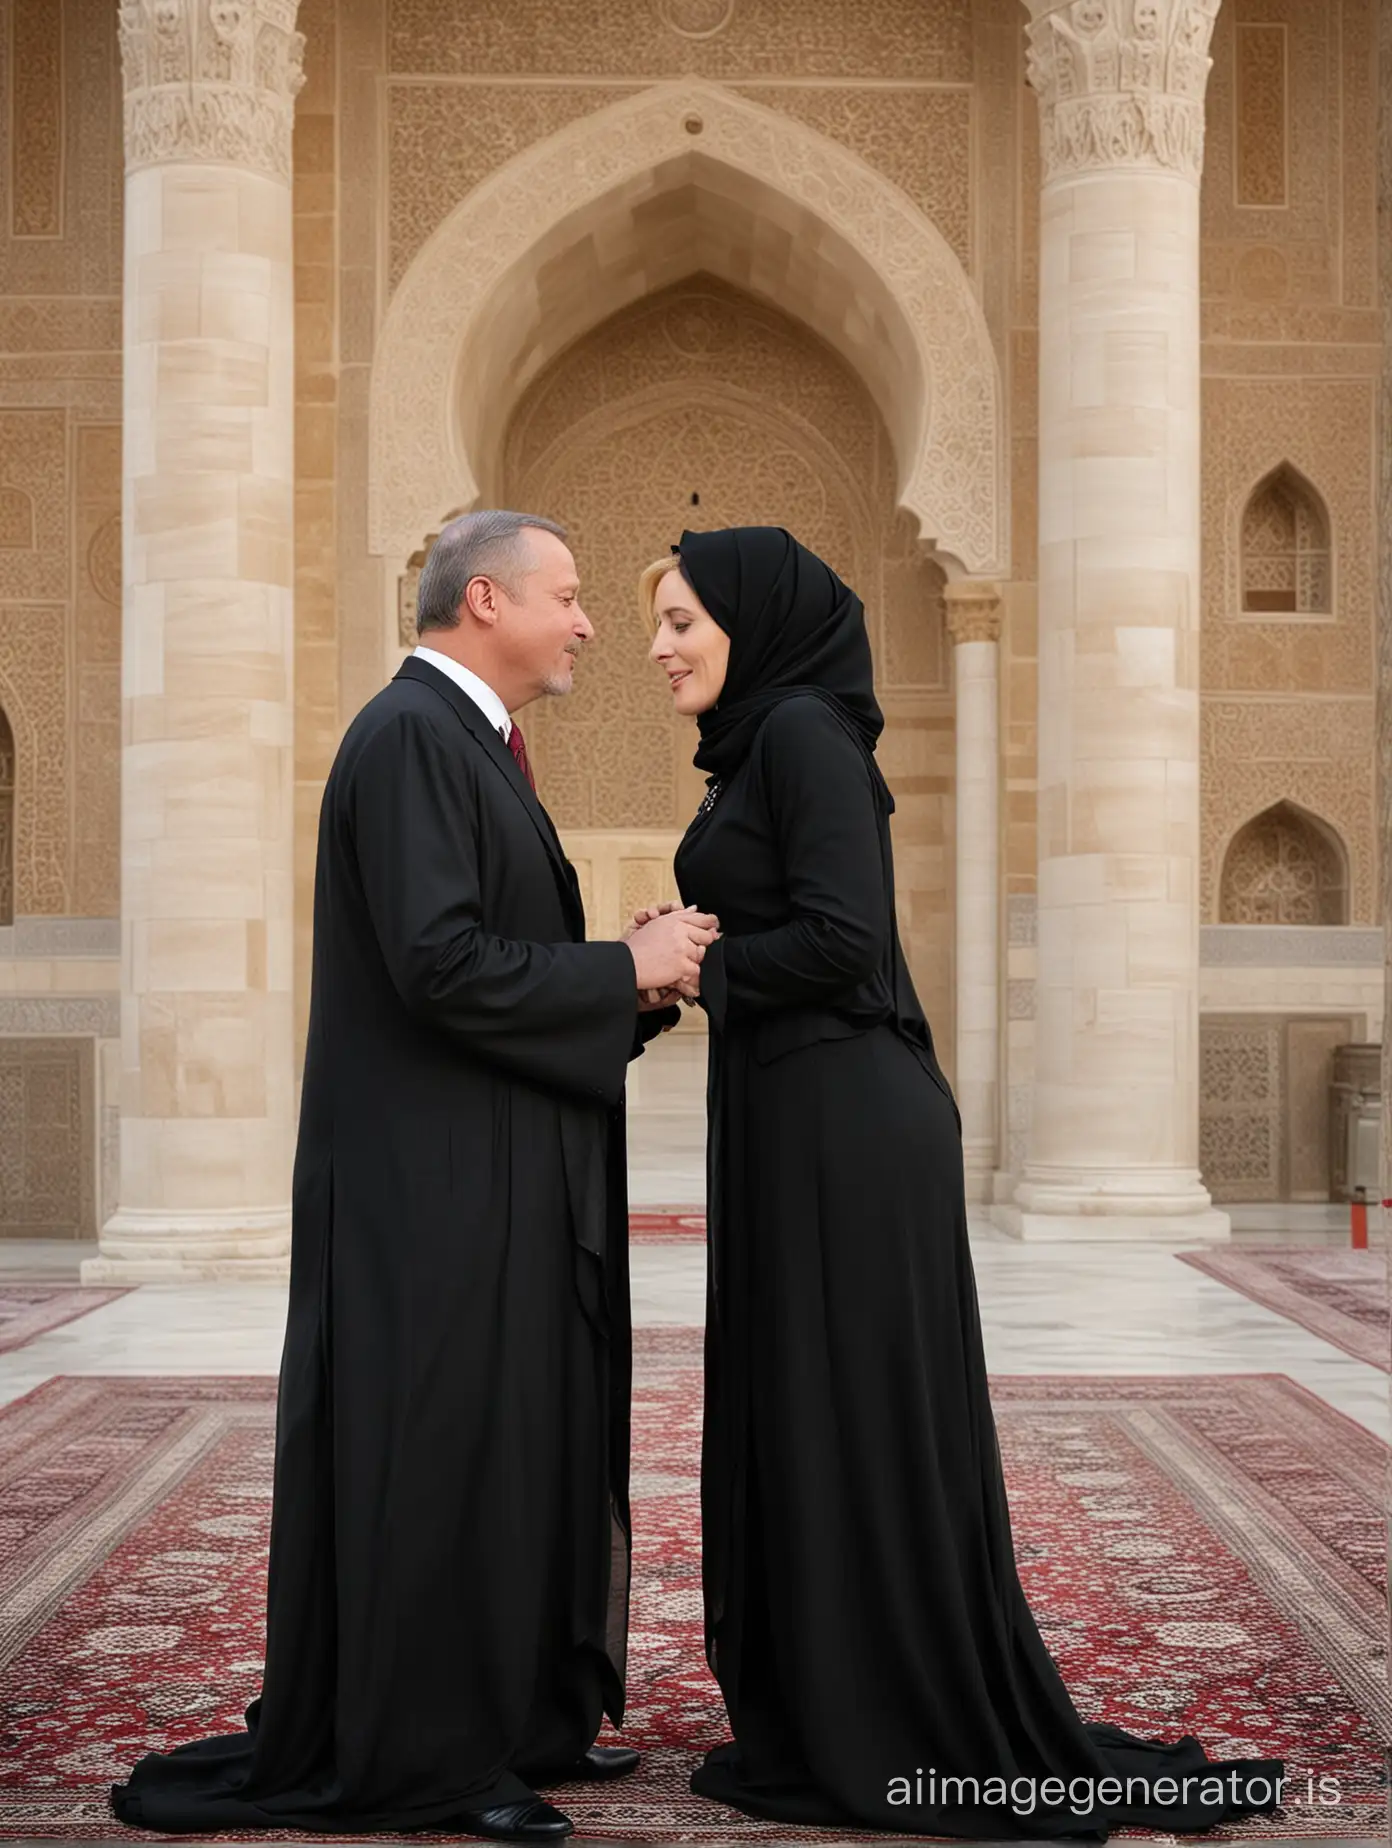 red haired Gillian Anderson alone with President Erdogan, he asked Gillian to dress accordingly to his Muslim faith and wear a floor-length black oversized flowing jilbab with long black hijab while he is kissing her tenderly